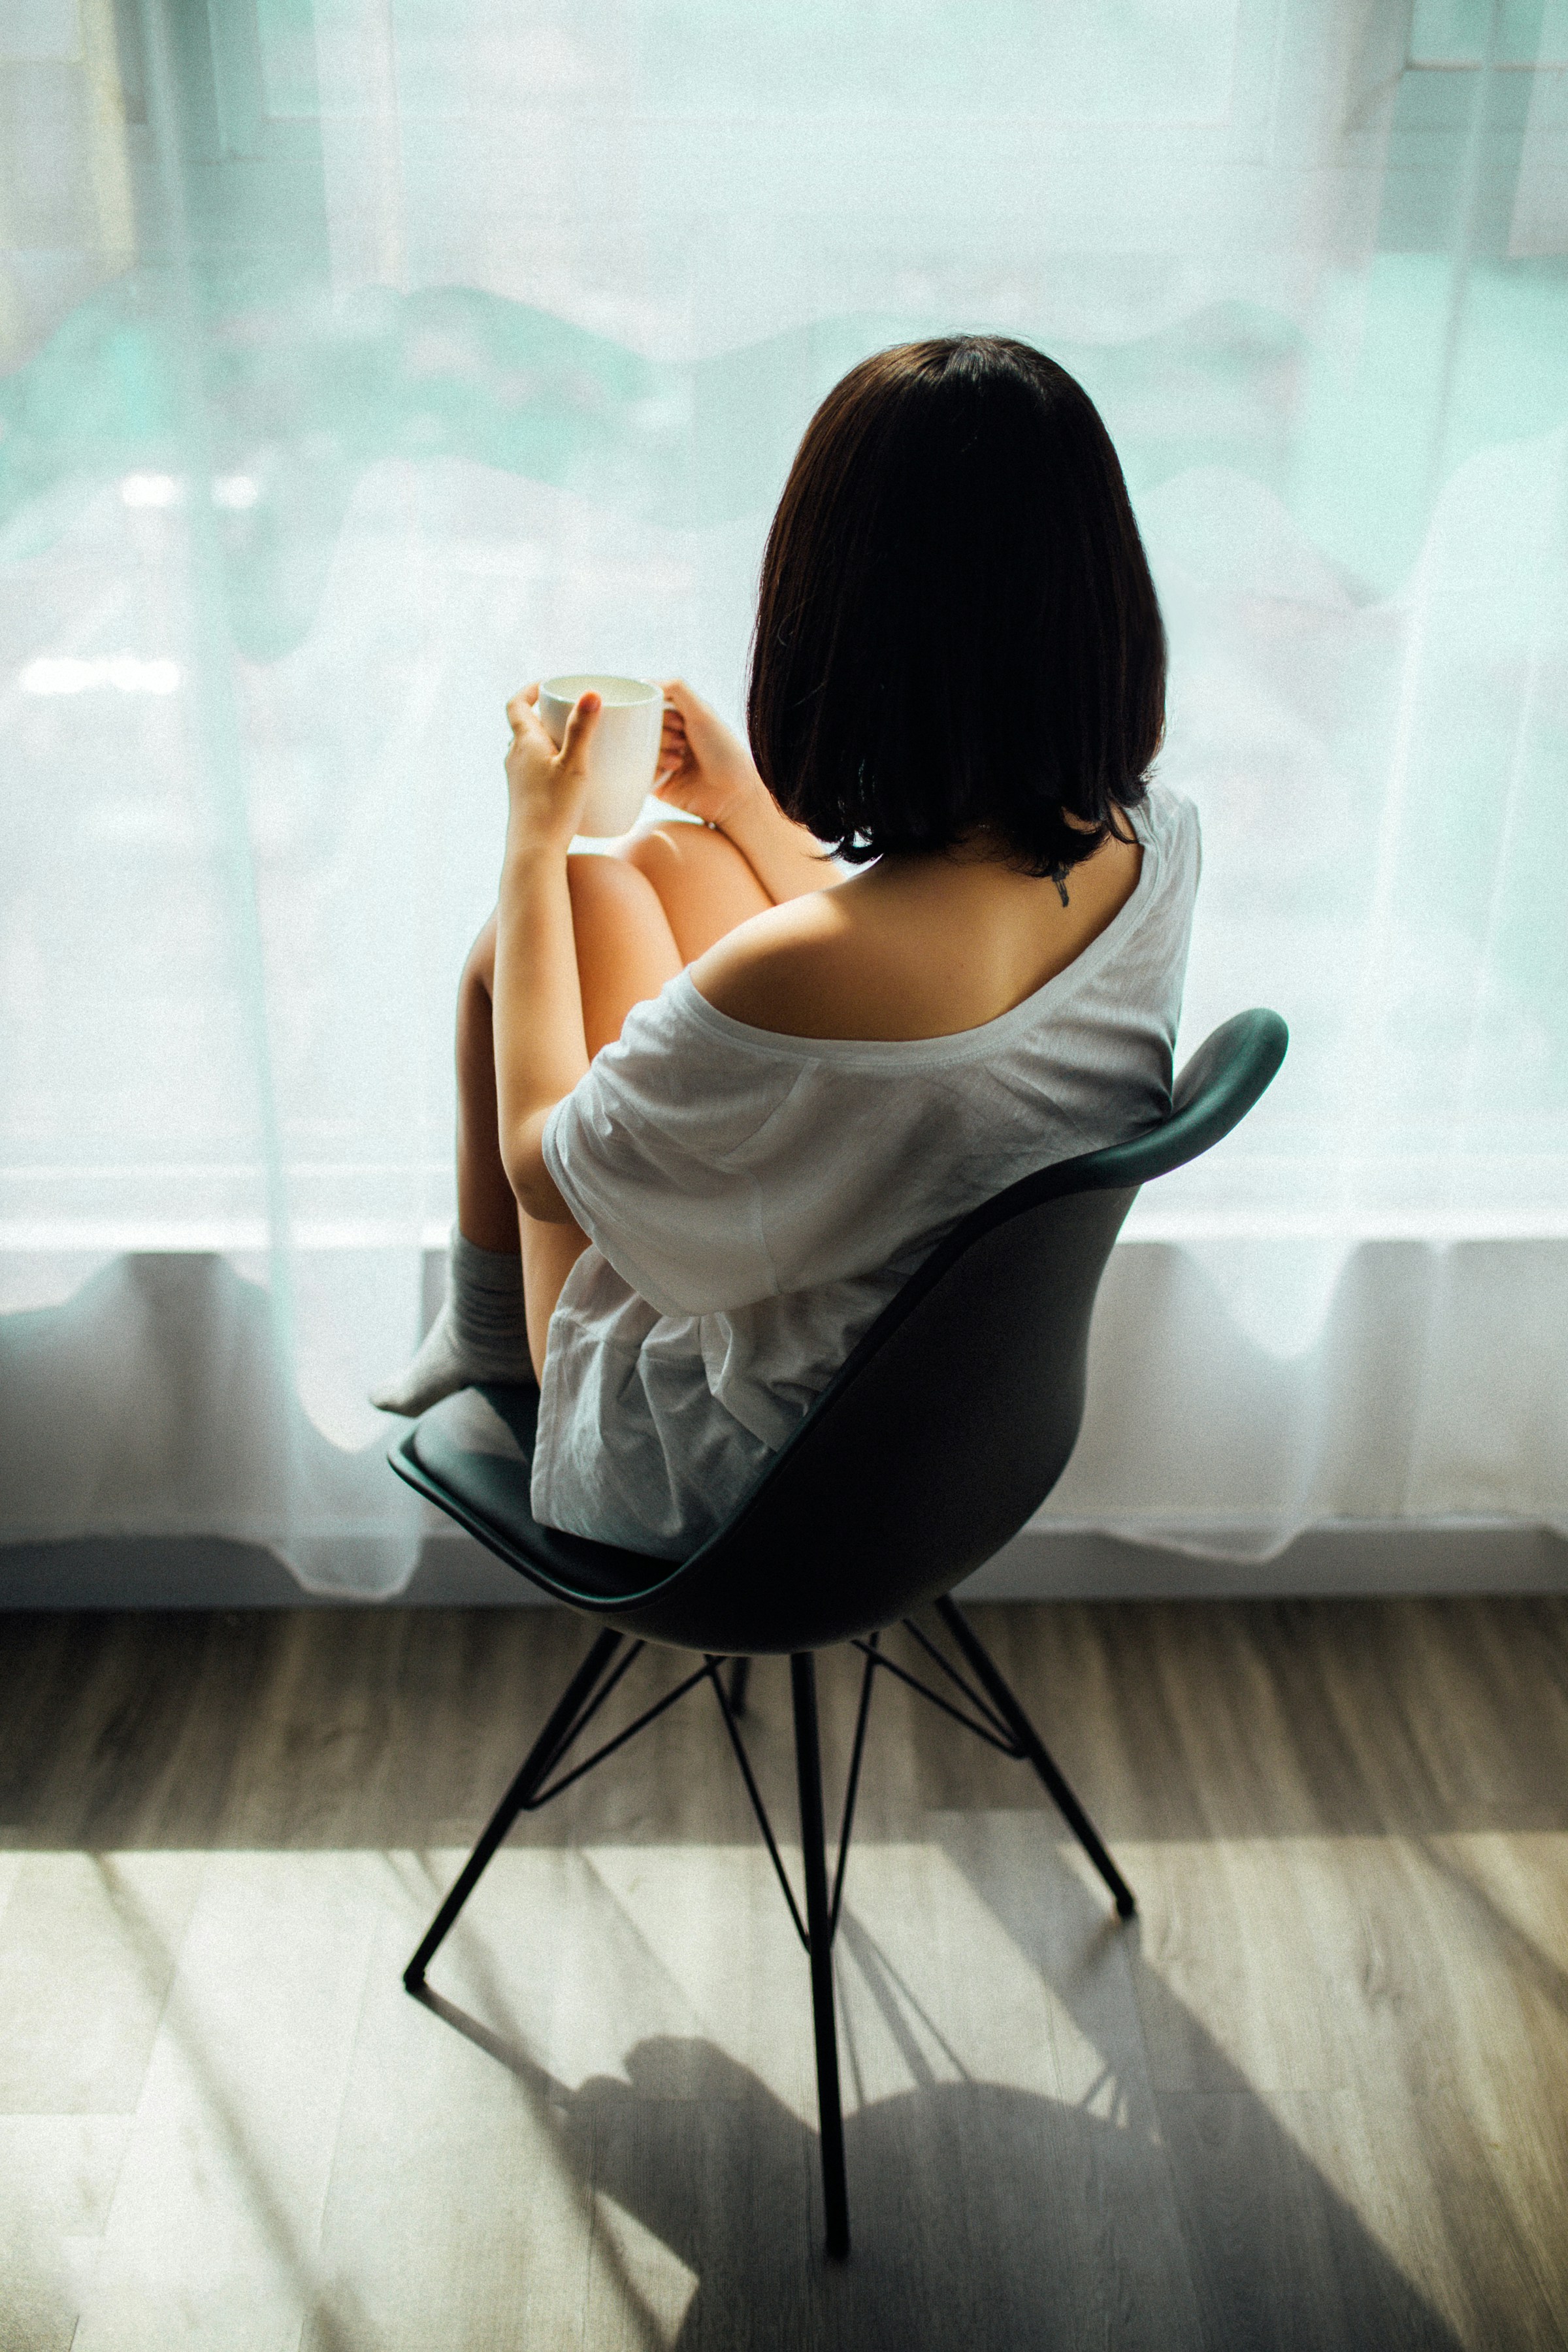 A woman sitting and looking out the window | Source: Unsplash